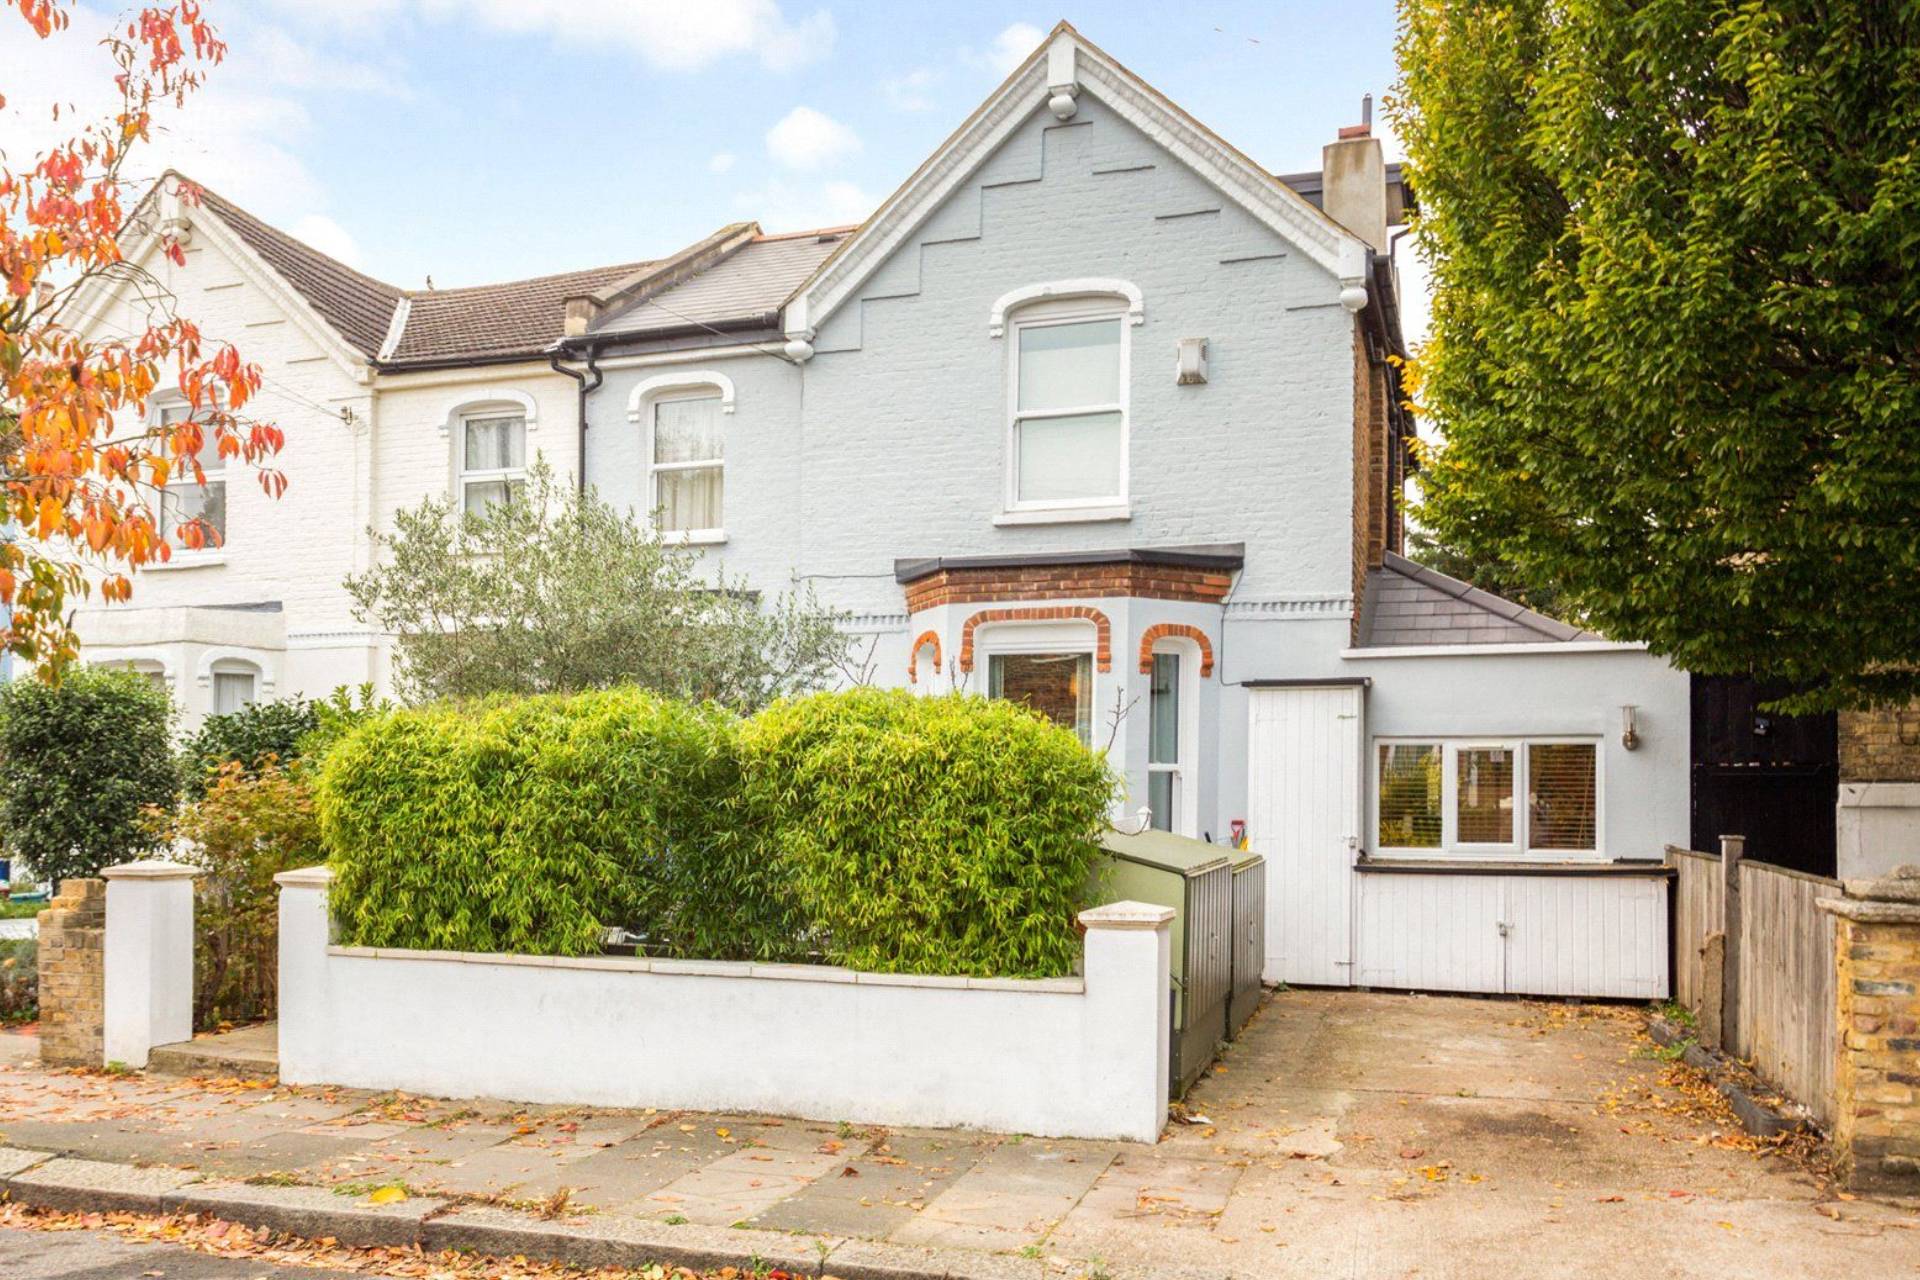 What Should You Check When Buying A New Home In Chiswick?